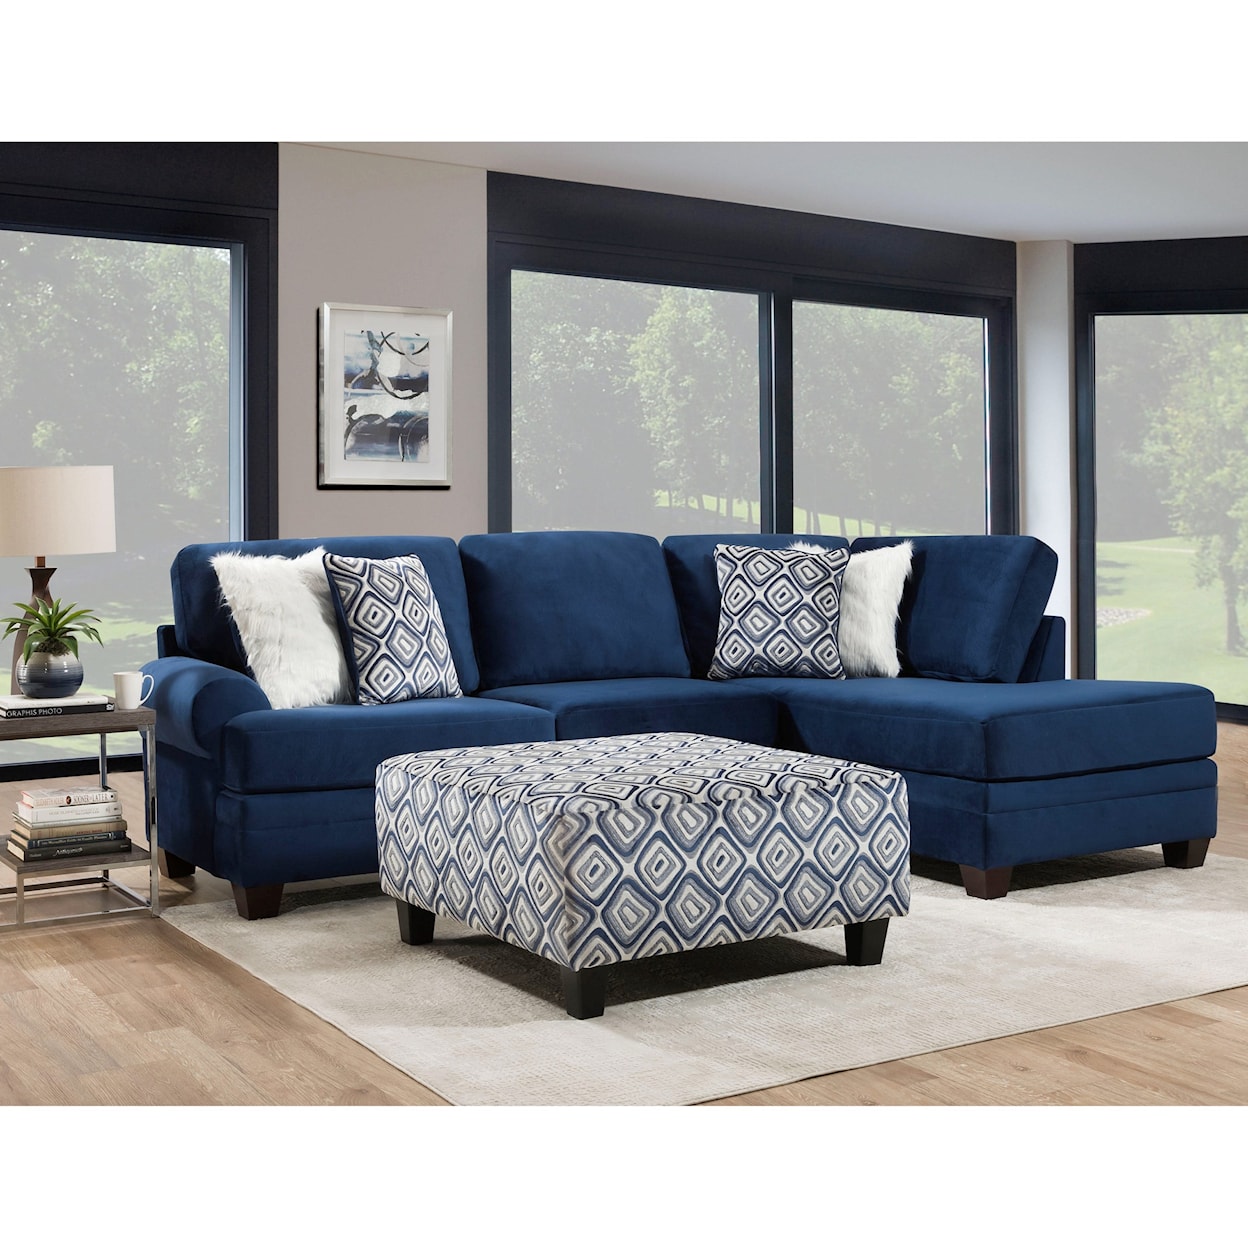 Albany 8642 Sectional